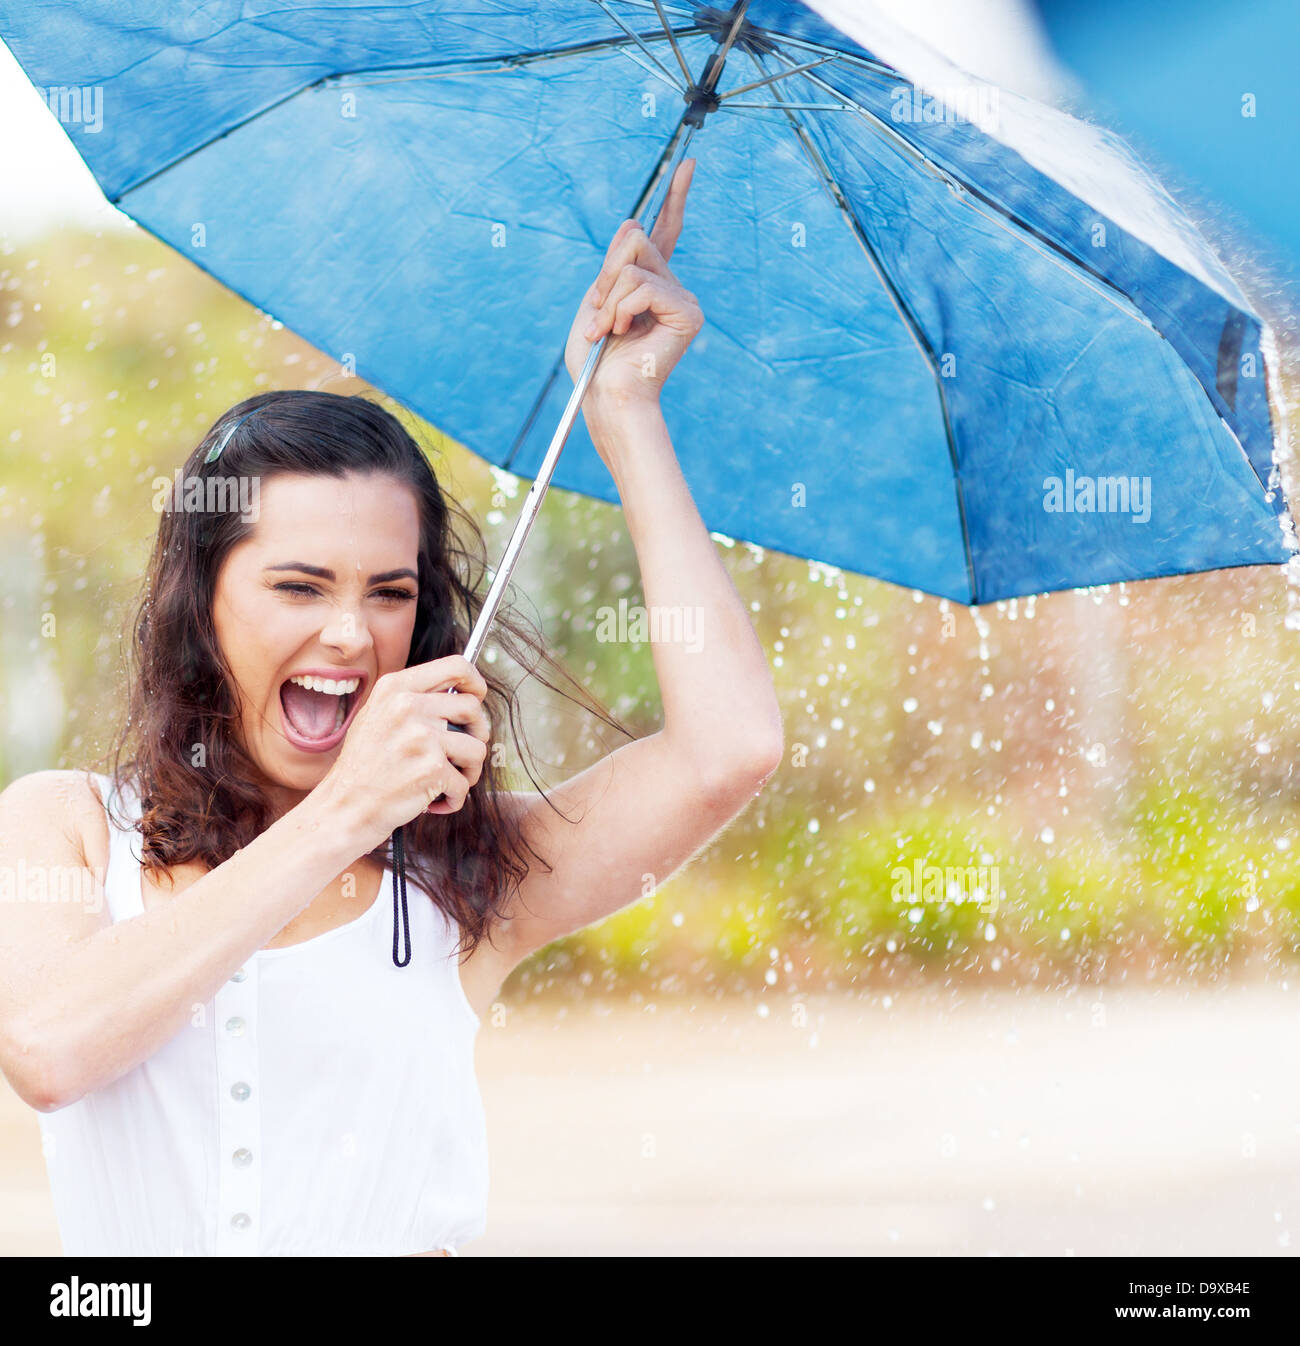 playful young woman holding umbrella in the rain Stock Photo